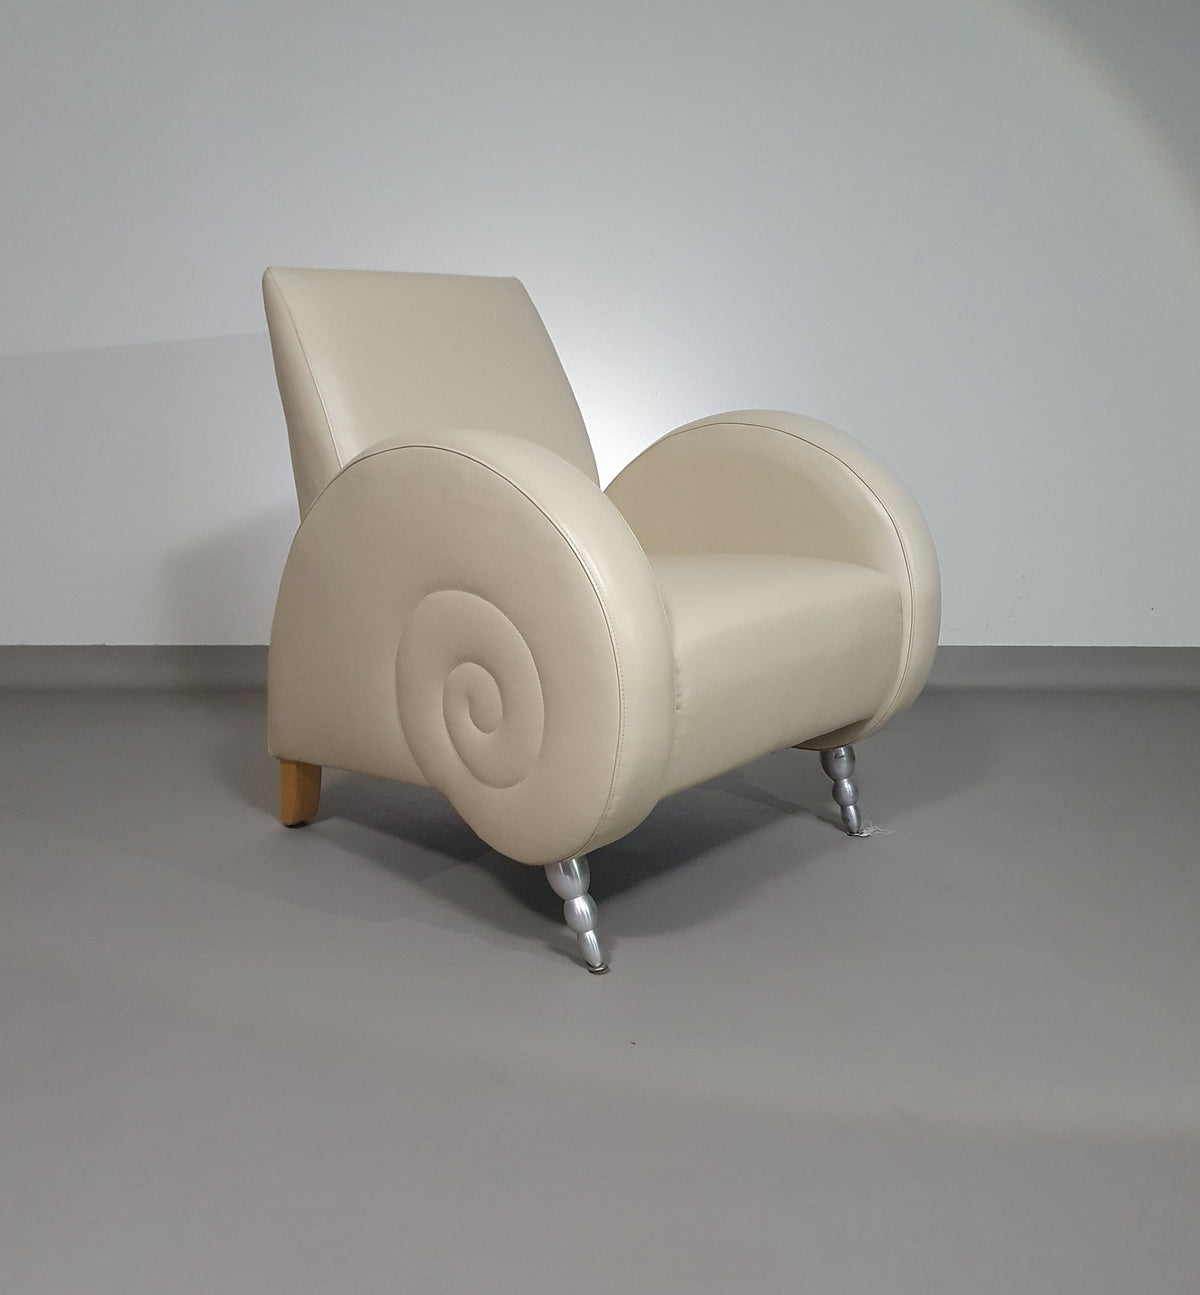 Leather snail house chairs